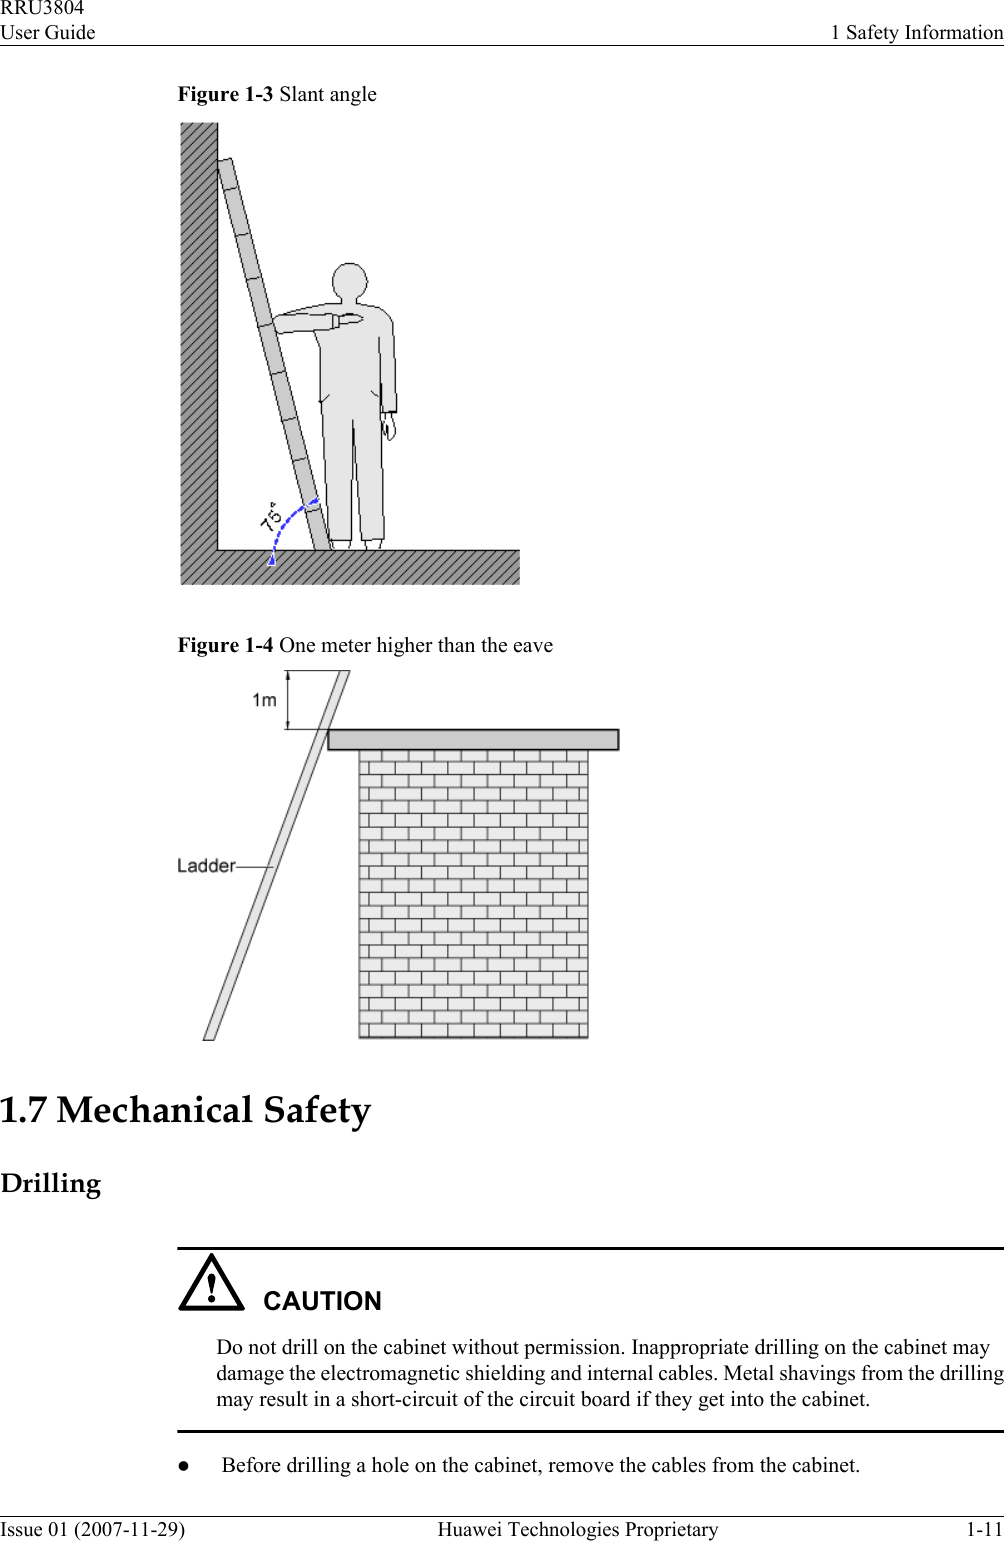 Figure 1-3 Slant angleFigure 1-4 One meter higher than the eave1.7 Mechanical SafetyDrillingCAUTIONDo not drill on the cabinet without permission. Inappropriate drilling on the cabinet maydamage the electromagnetic shielding and internal cables. Metal shavings from the drillingmay result in a short-circuit of the circuit board if they get into the cabinet.lBefore drilling a hole on the cabinet, remove the cables from the cabinet.RRU3804User Guide 1 Safety InformationIssue 01 (2007-11-29)  Huawei Technologies Proprietary 1-11